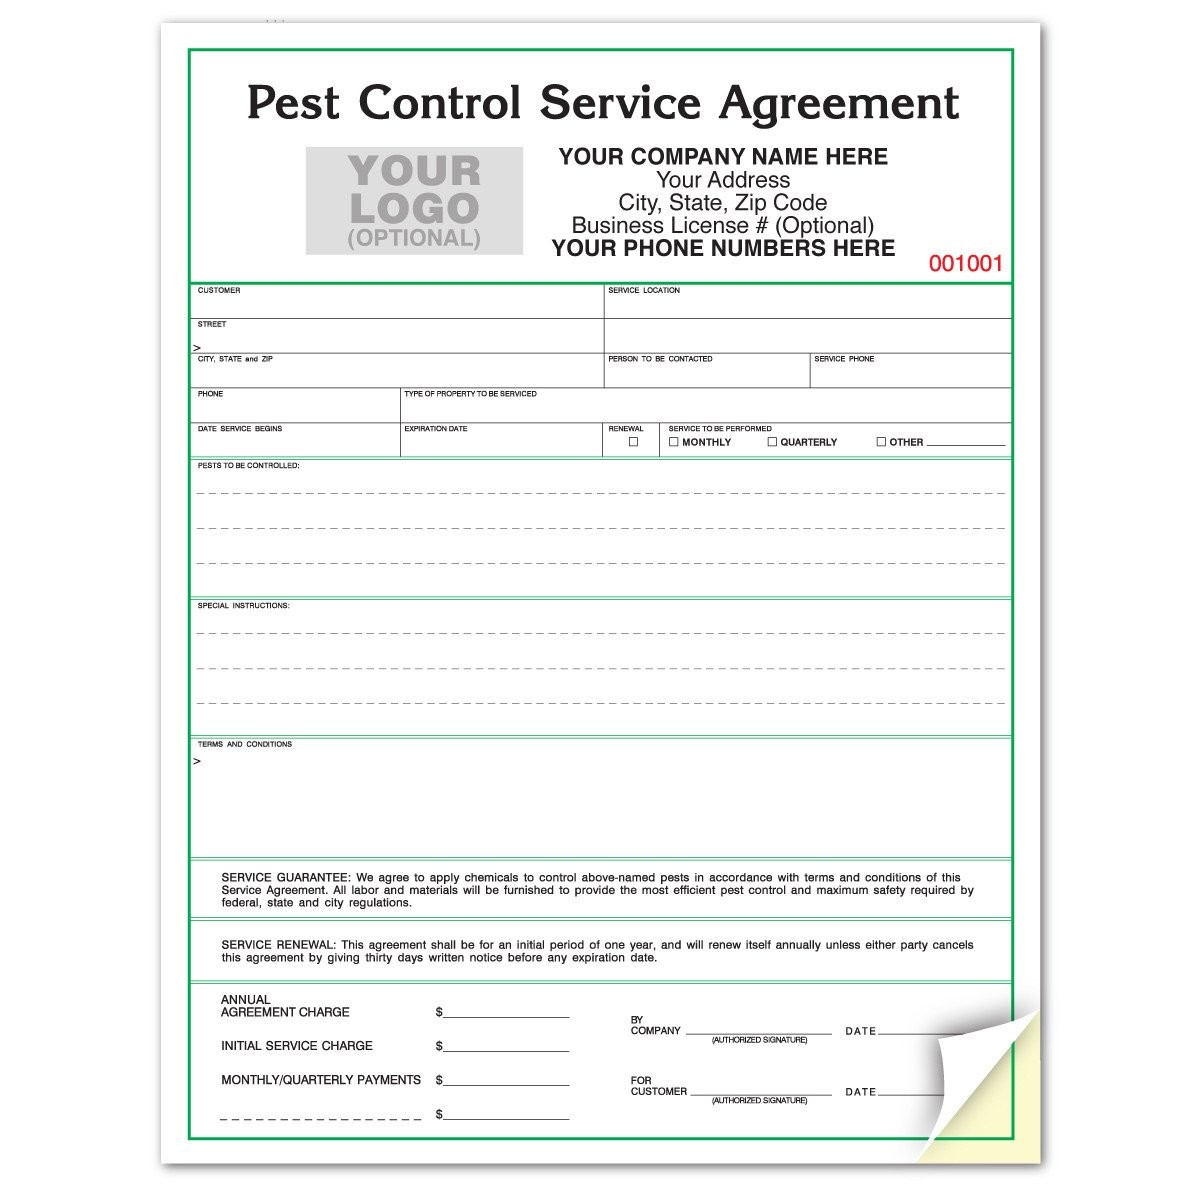 Pest Control Service Contract Agreement Document Form